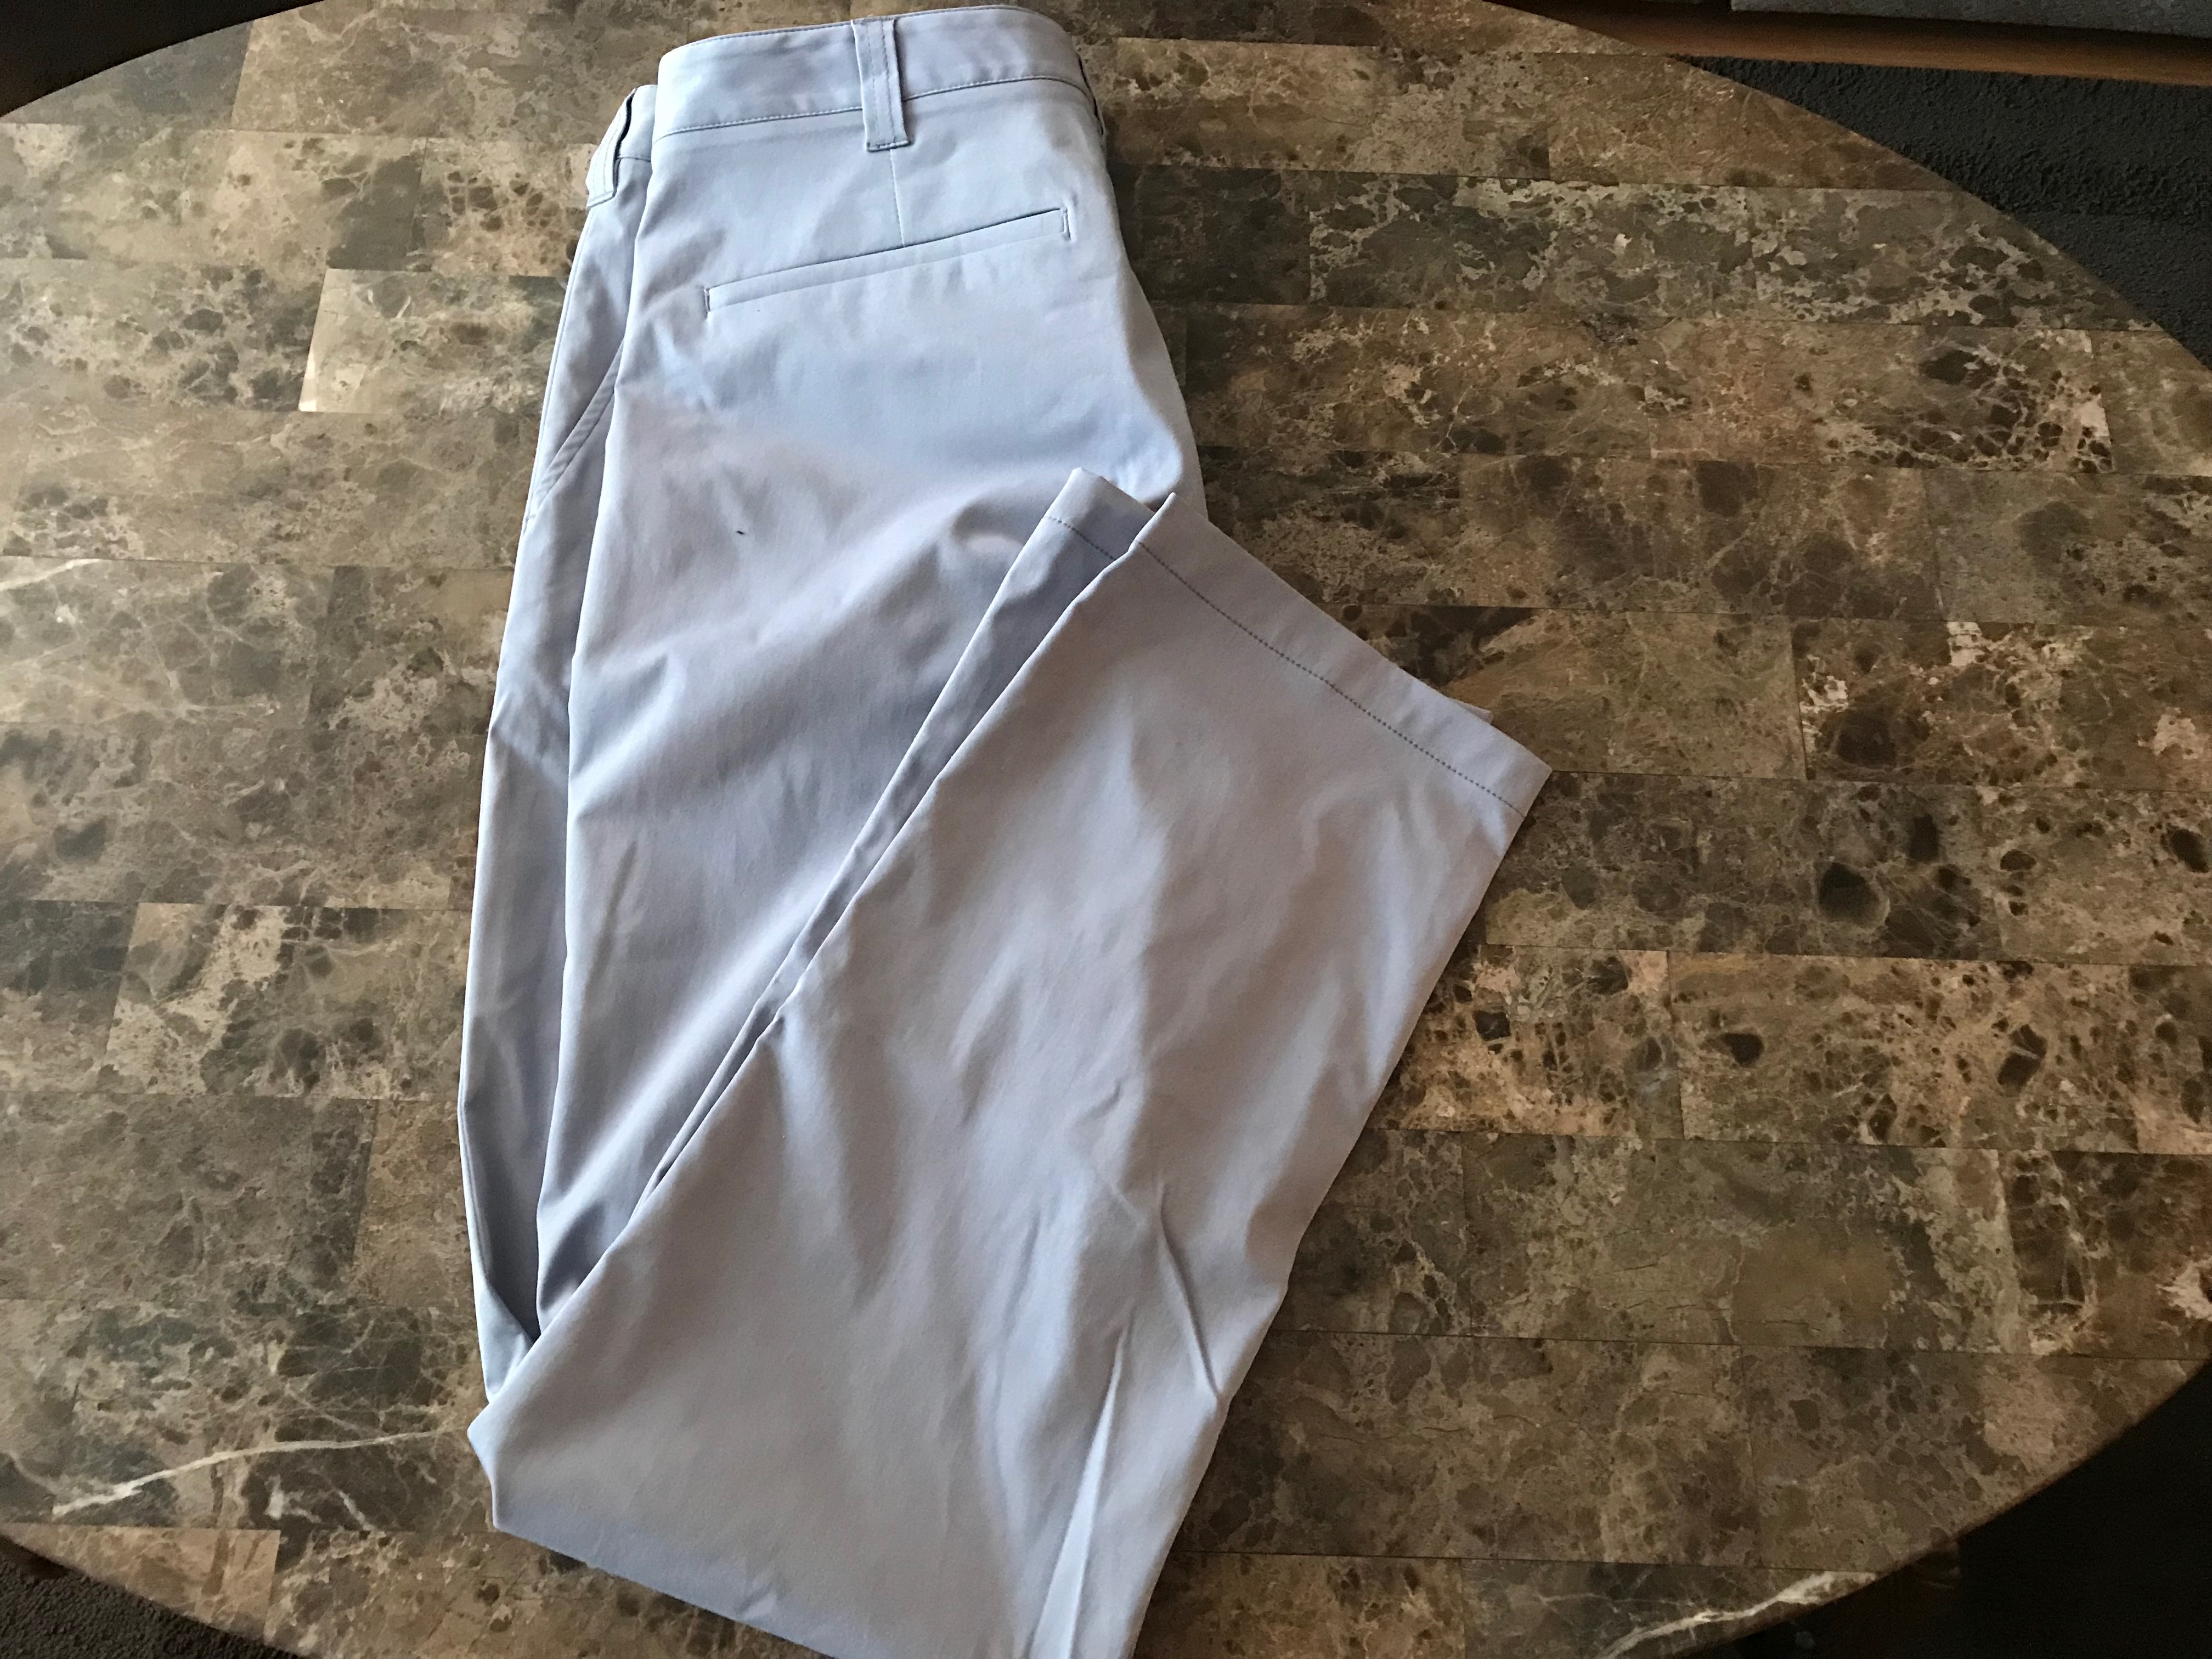 a pair of pants on a marble surface